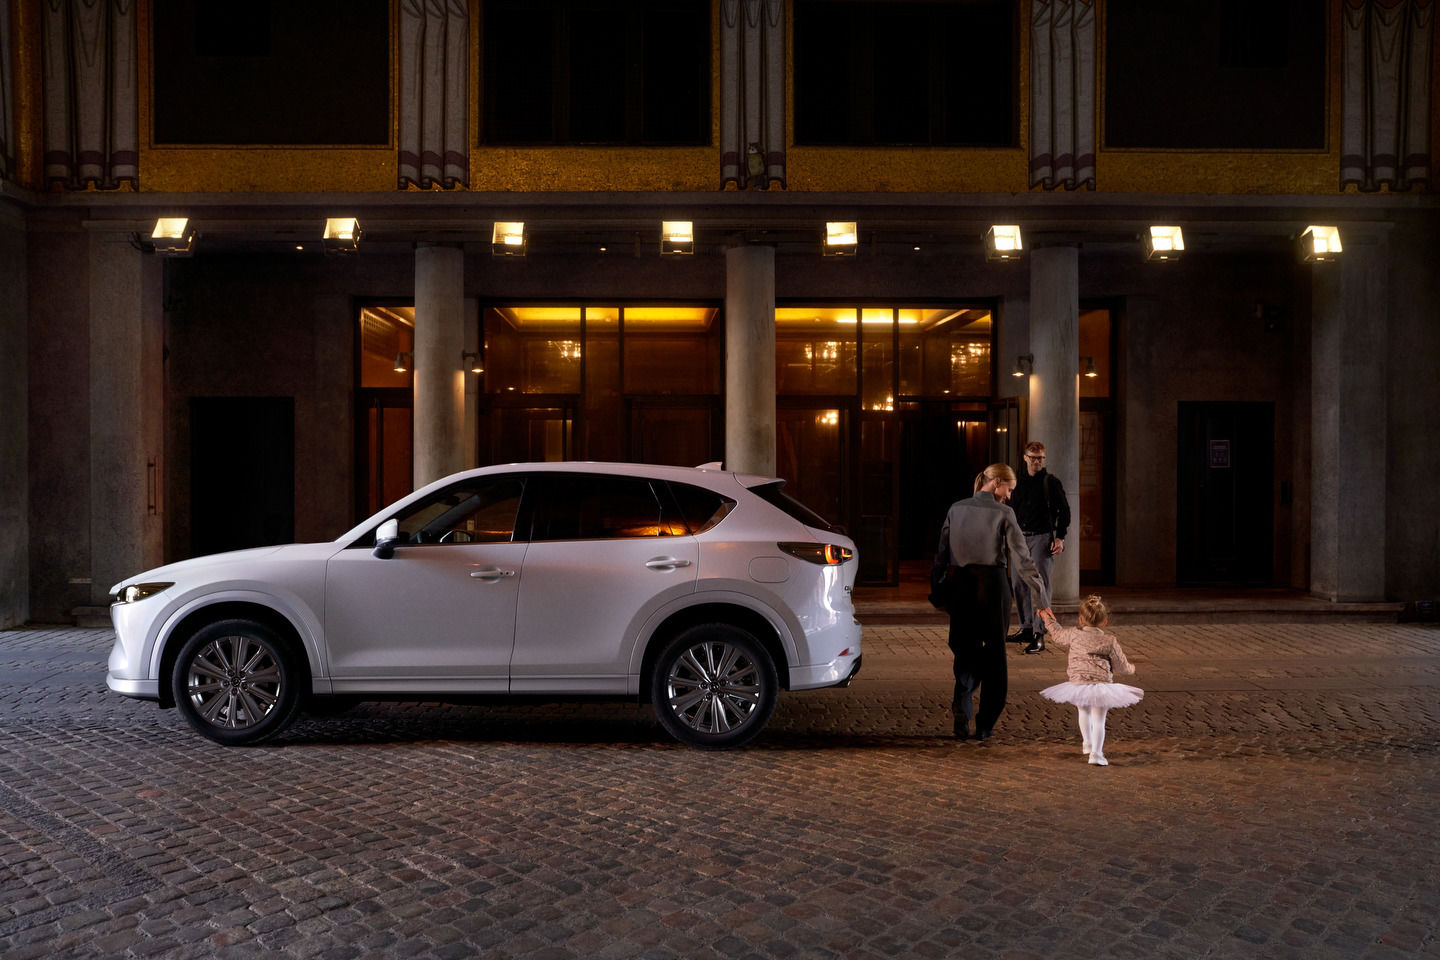 The 2023 Mazda CX-5 is an exceptional premium SUV